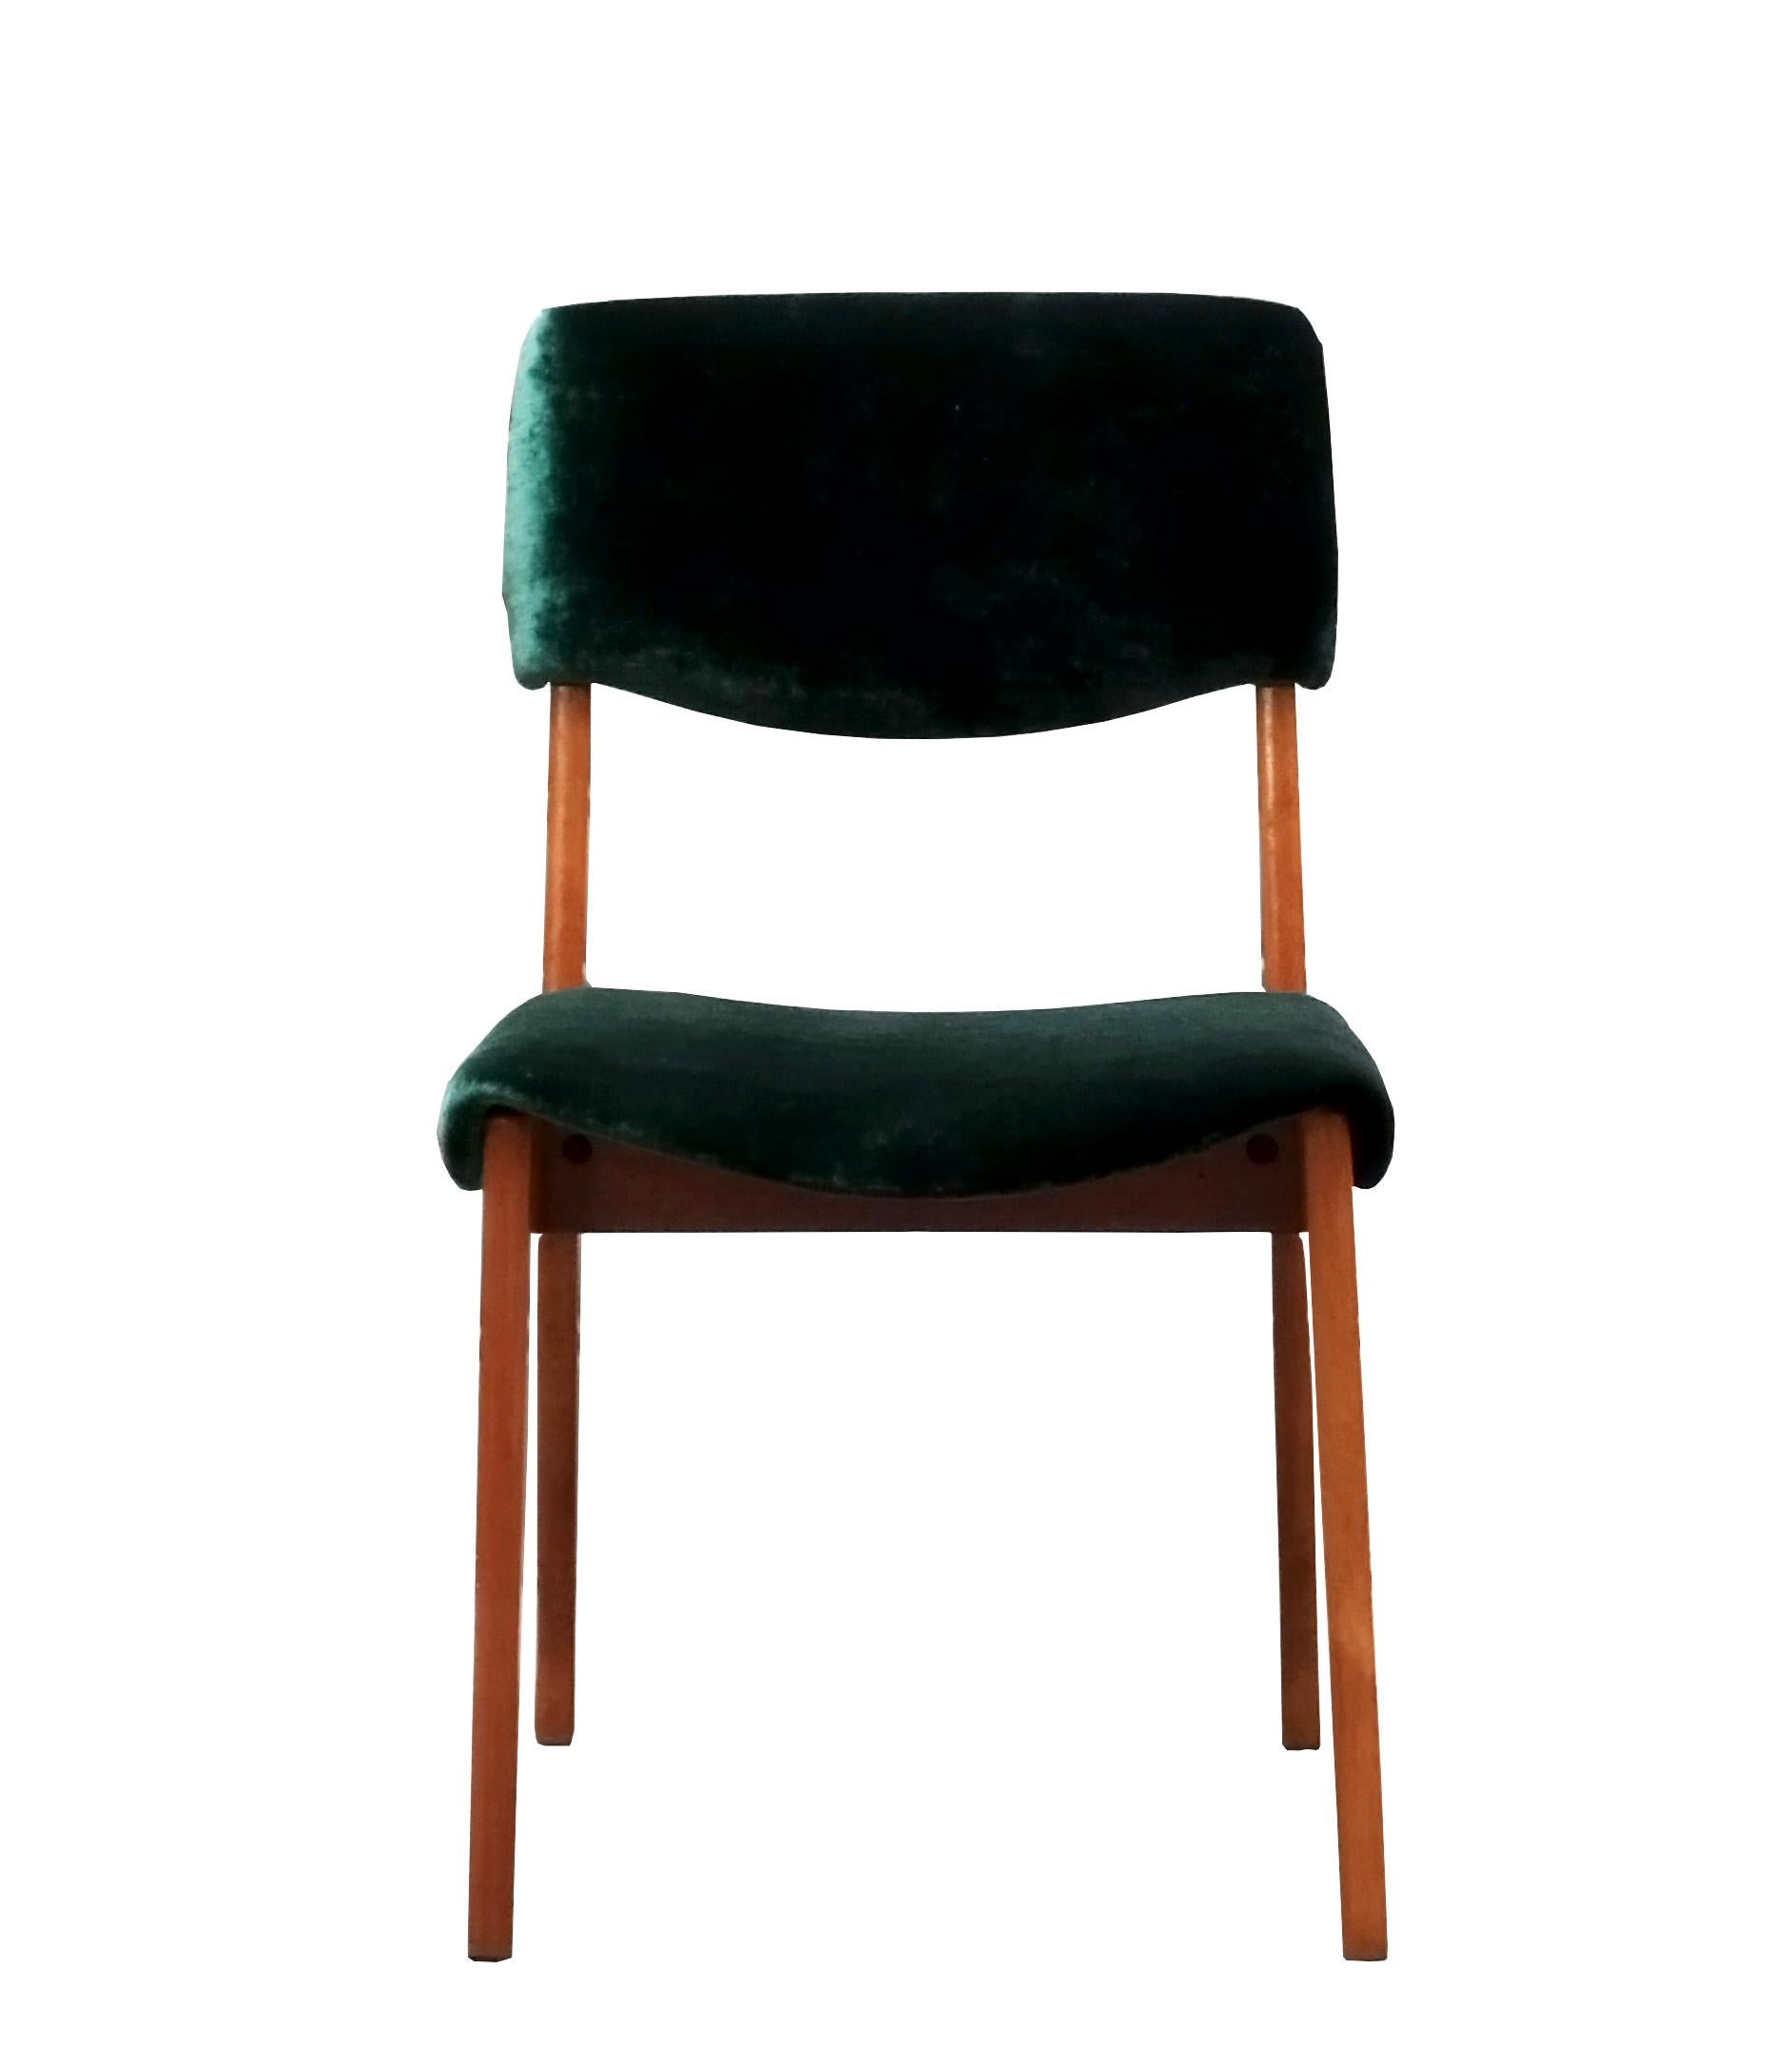 This chair was designed by Ico Parisi and manufactured by M.I.M. Rome in the 1950s. The combination of green upholstery and wood creates a balanced design. With manufacturer's label.